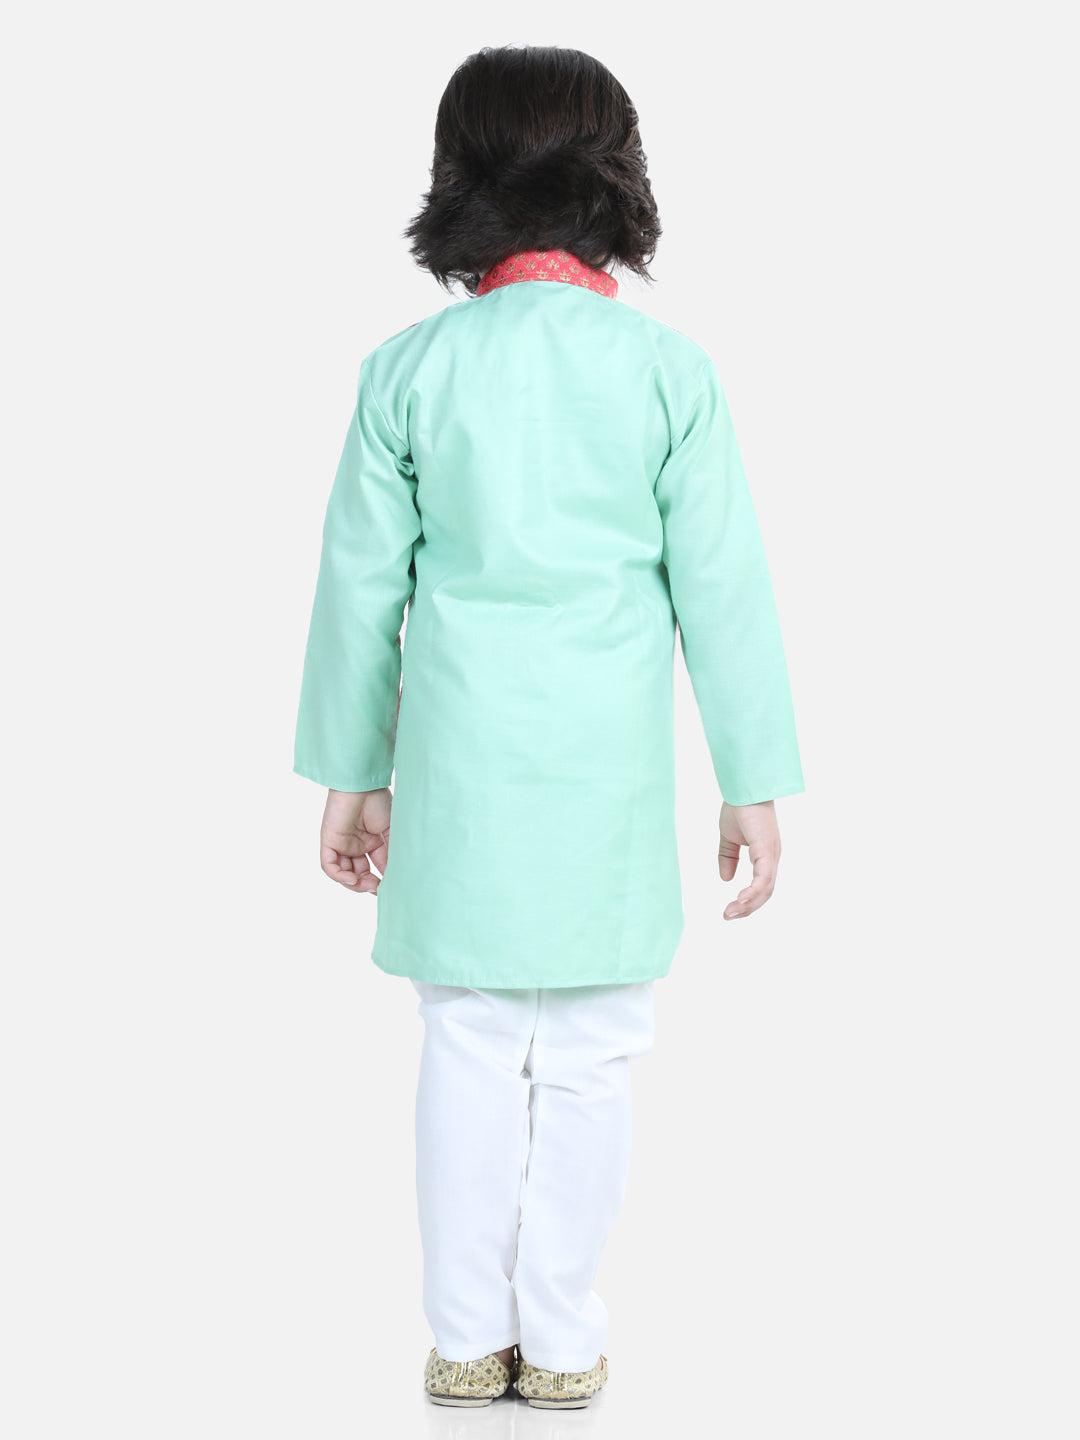 BownBee Sibling Sets Attached Jacquard Jacket Kurta Pajama for Boys Salwar Suit for Girls- Green